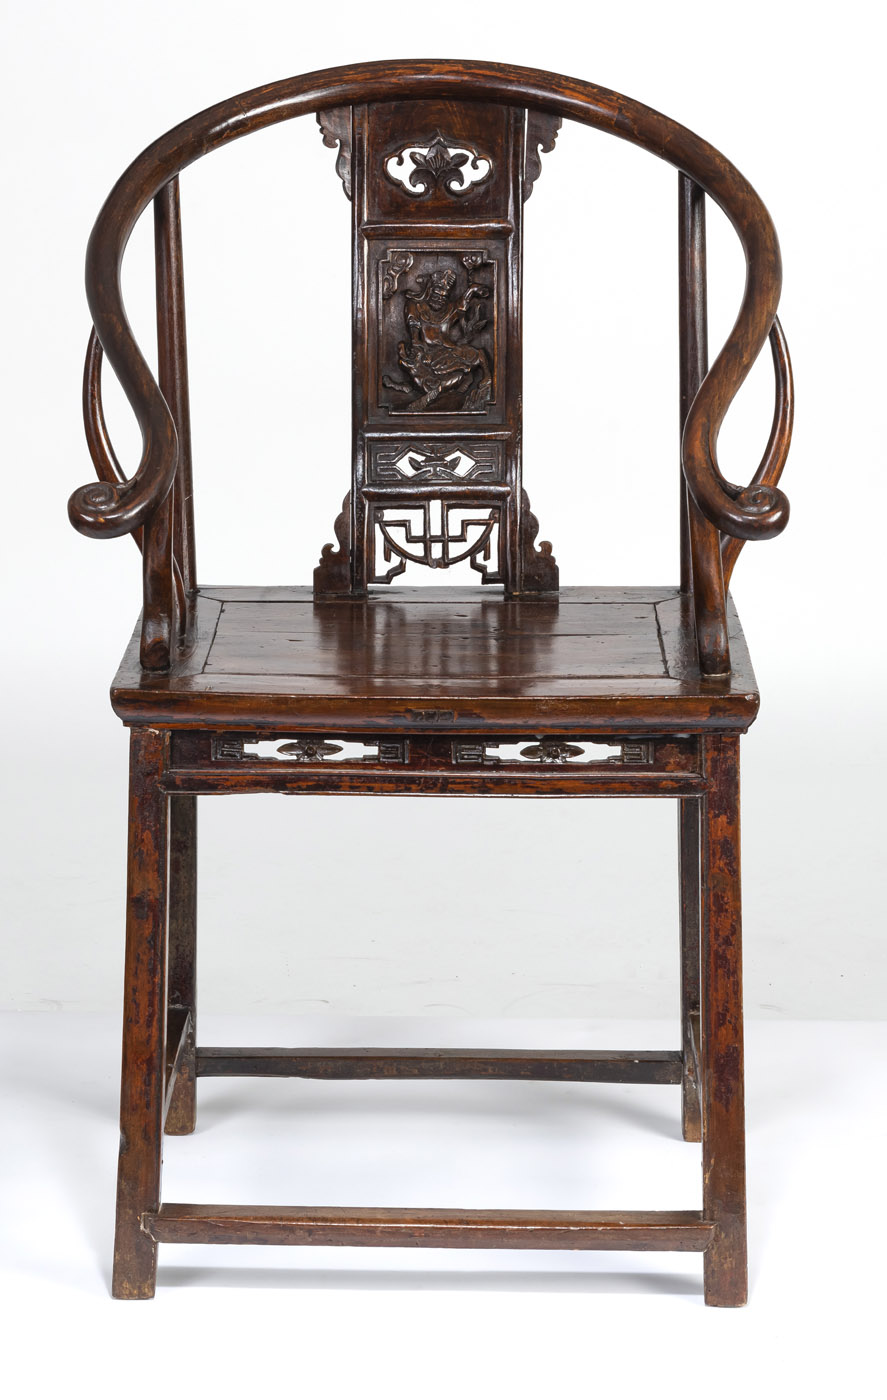 A WOODEN HORSESHOE-BACK CHAIR, CARVED WITH A BATTLE SCENE OF WU SONG AND A TIGER - Image 2 of 6